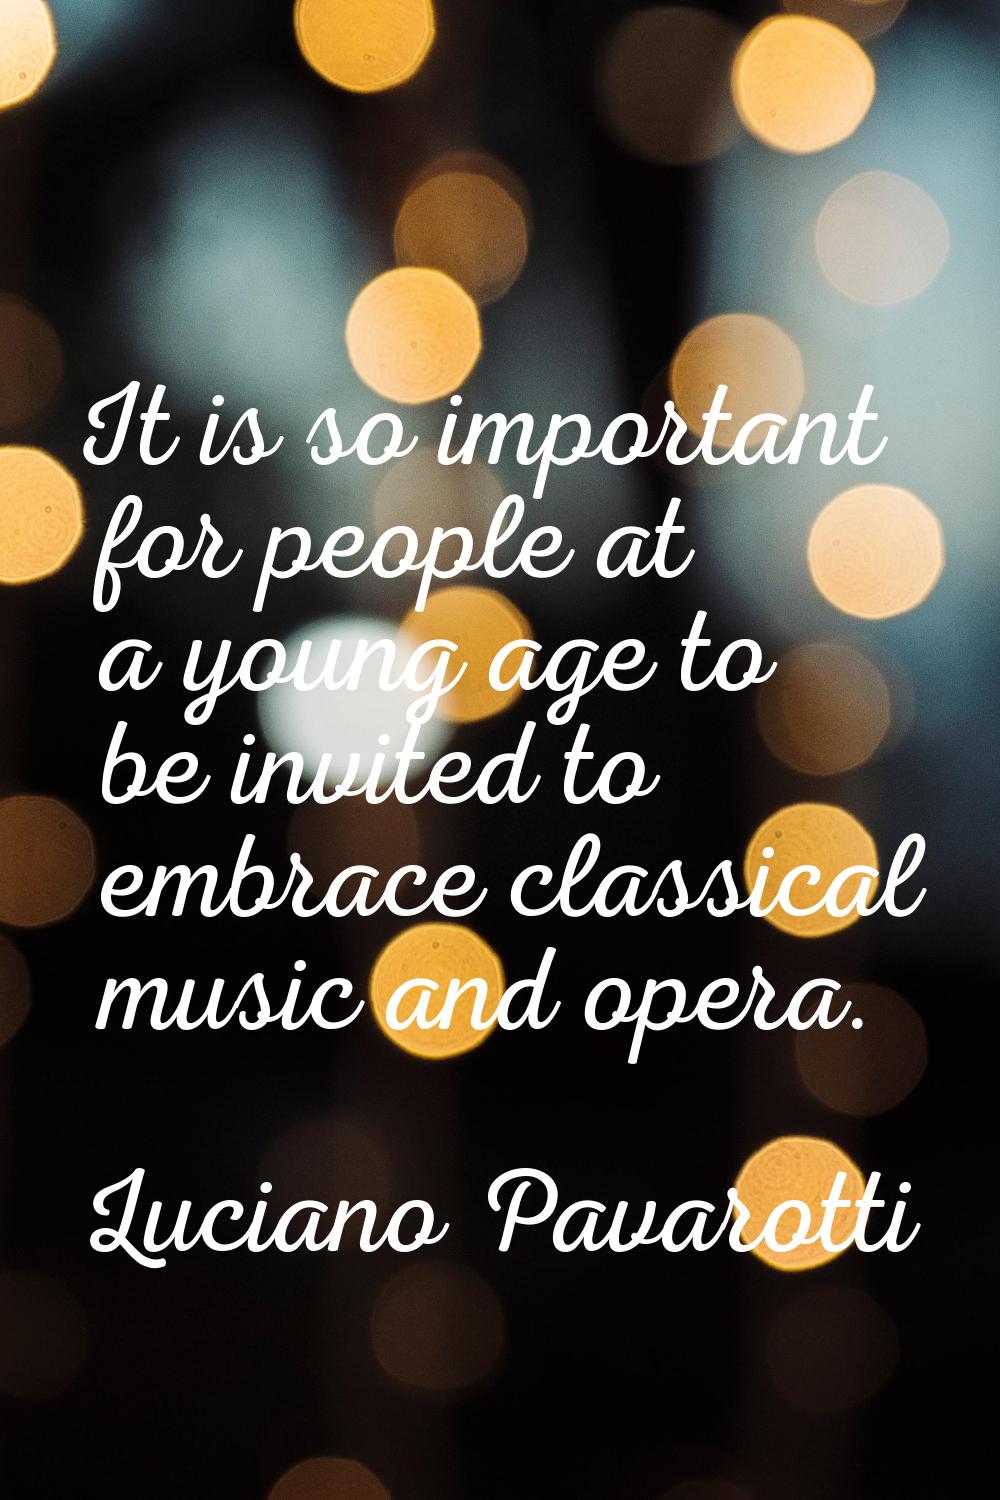 It is so important for people at a young age to be invited to embrace classical music and opera.